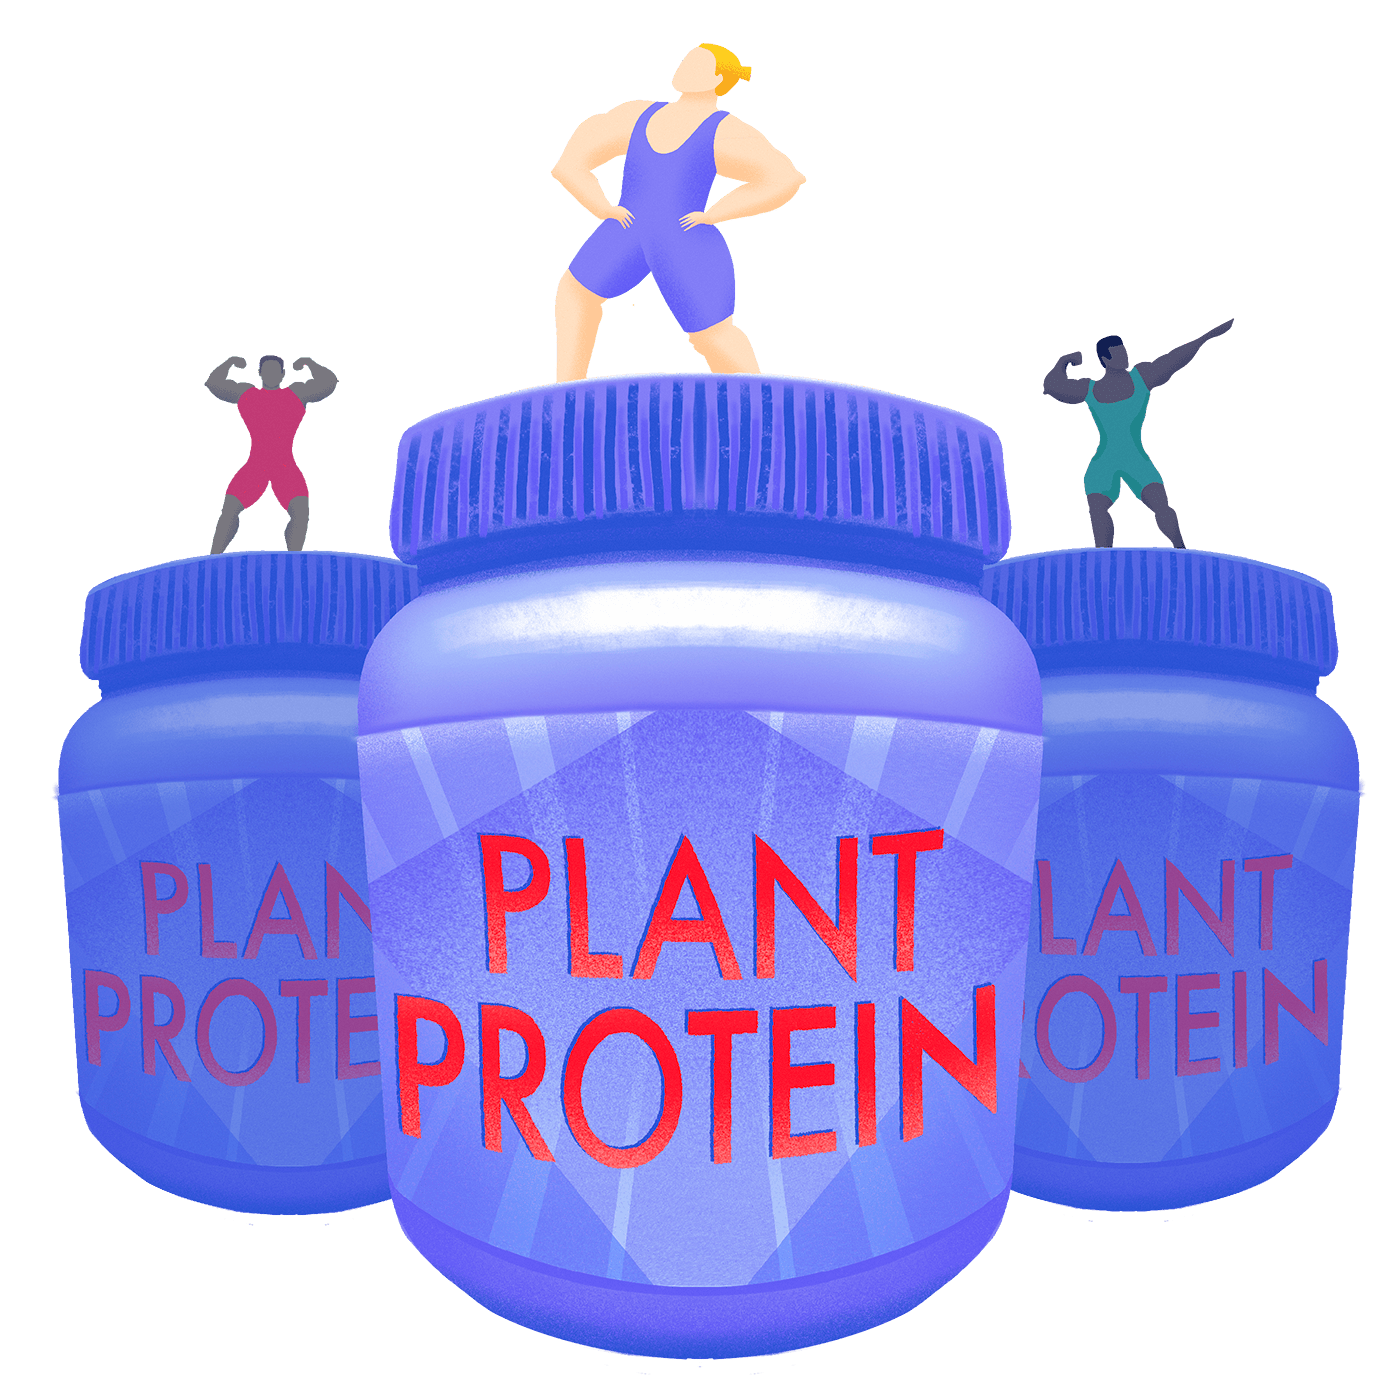 an illustration of people in workout gear standing on top of three tiered containers of plant protein